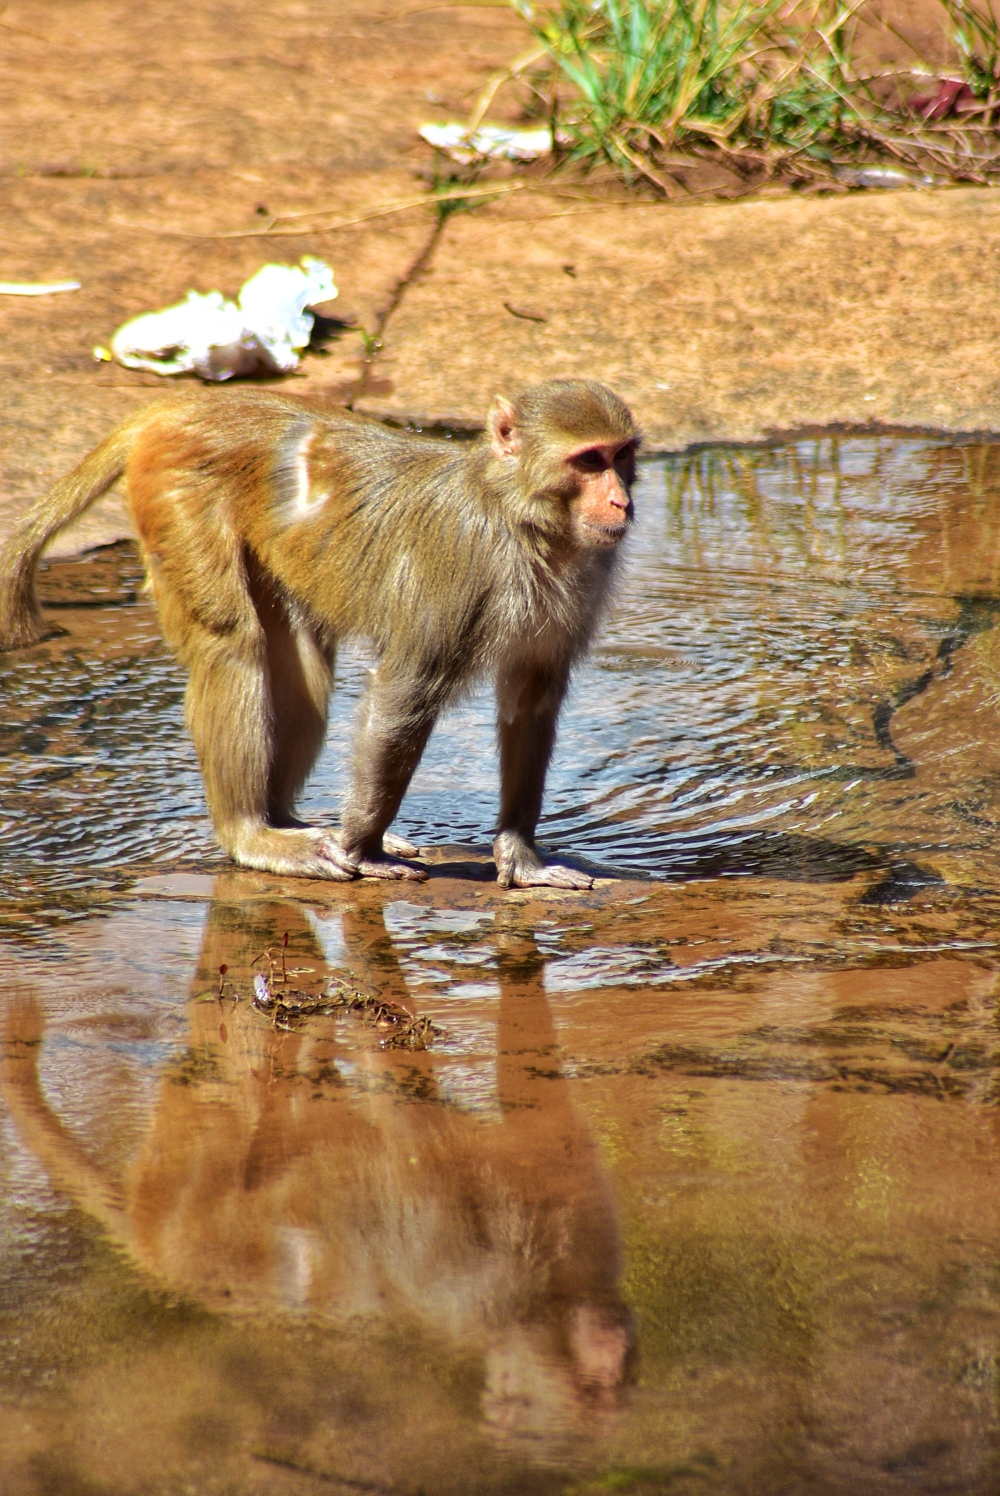 Monkey,   This picture is taken in Bastar district of Chhattisgarh., #nature #photography #love #instagood #photooftheday #travel #sky #beautiful #art #naturephotography #like #landscape #sunset #photo #picoftheday #instagram #sun #beach #life #winter #sea #fun #cute #clouds #happy #naturelovers #summer #bhfyp, #Monkey #wildlife #nature, #nature #chitrakhotwaterfall #landscape #HD #wallpaper #background #picture #chitrakhot #Bastar #MunnabaghelPhotography, 